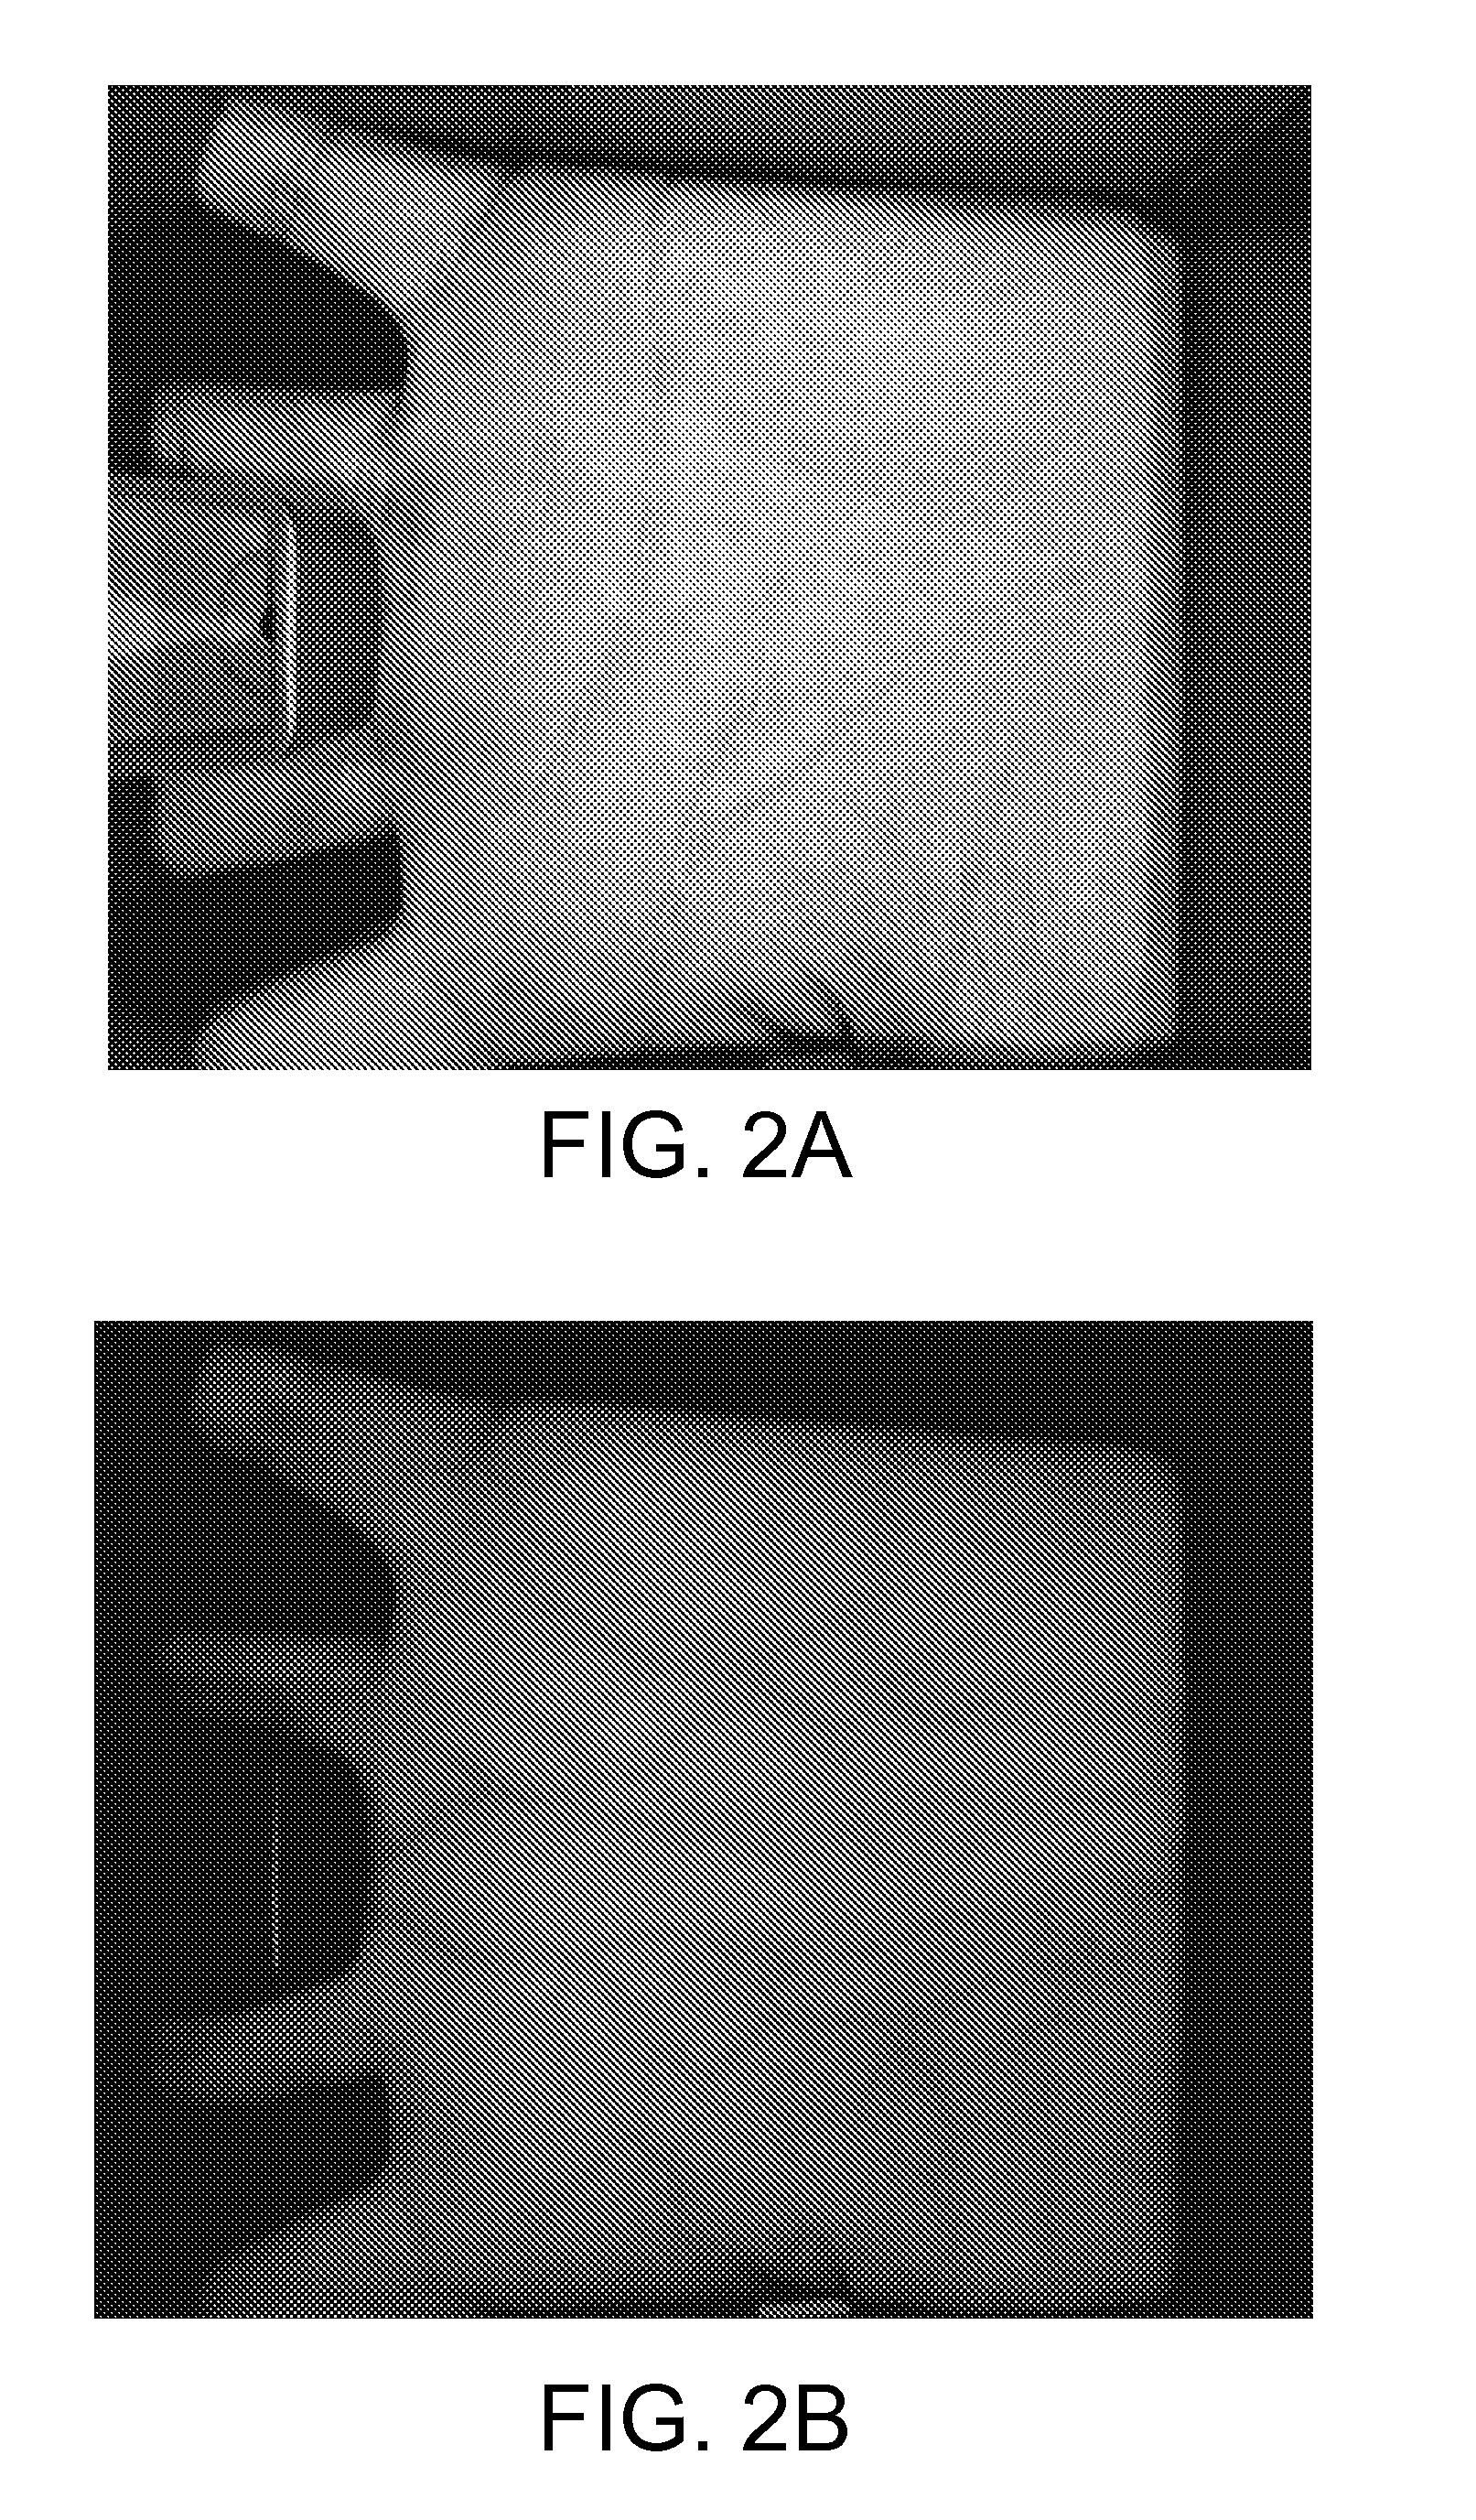 Method and Apparatus for Personal Identification Using Palmprint and Palm Vein